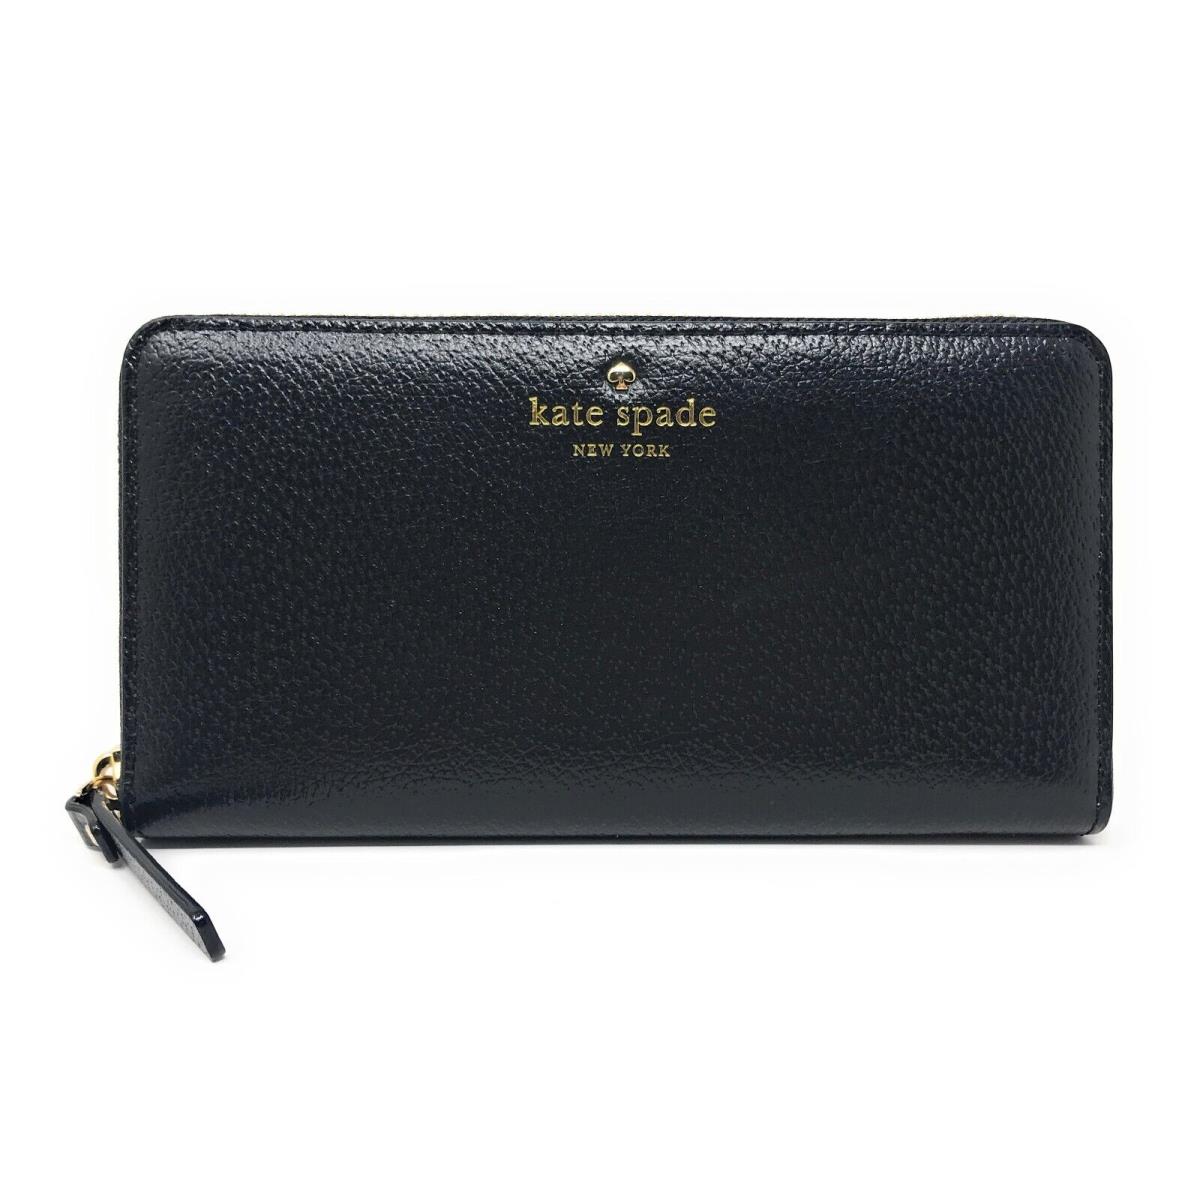 Kate Spade New York Grand Street Lacey Black Leather Wallet